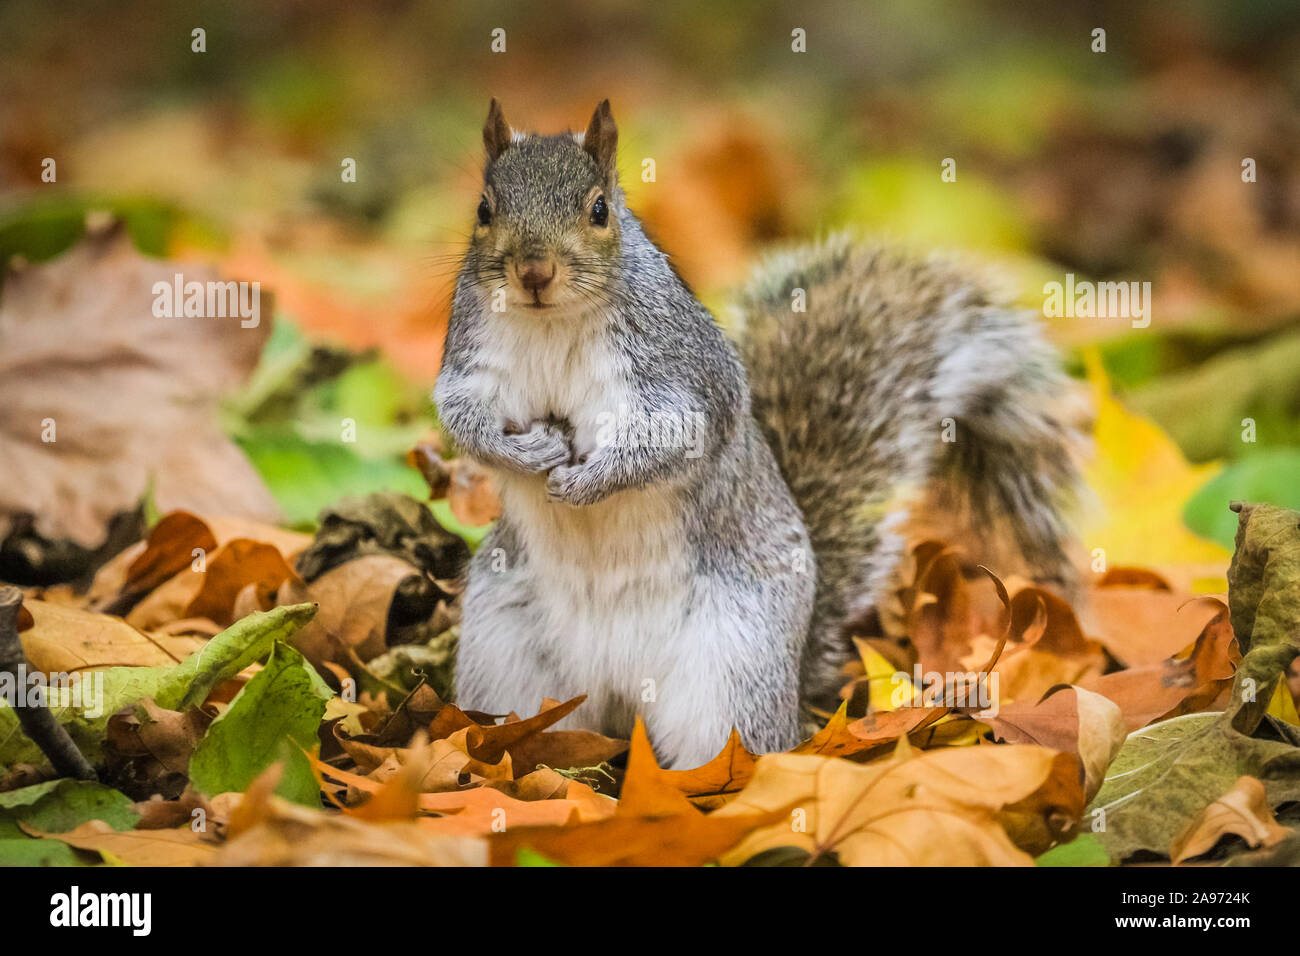 St James's Park, London, UK, 13th November 2019. Squirrels in London's St James's Park in Westminster enjoy the late autumn sunshine, digging for nuts and playing in the colourful fallen leaves. Credit: Imageplotter/Alamy Live News Stock Photo